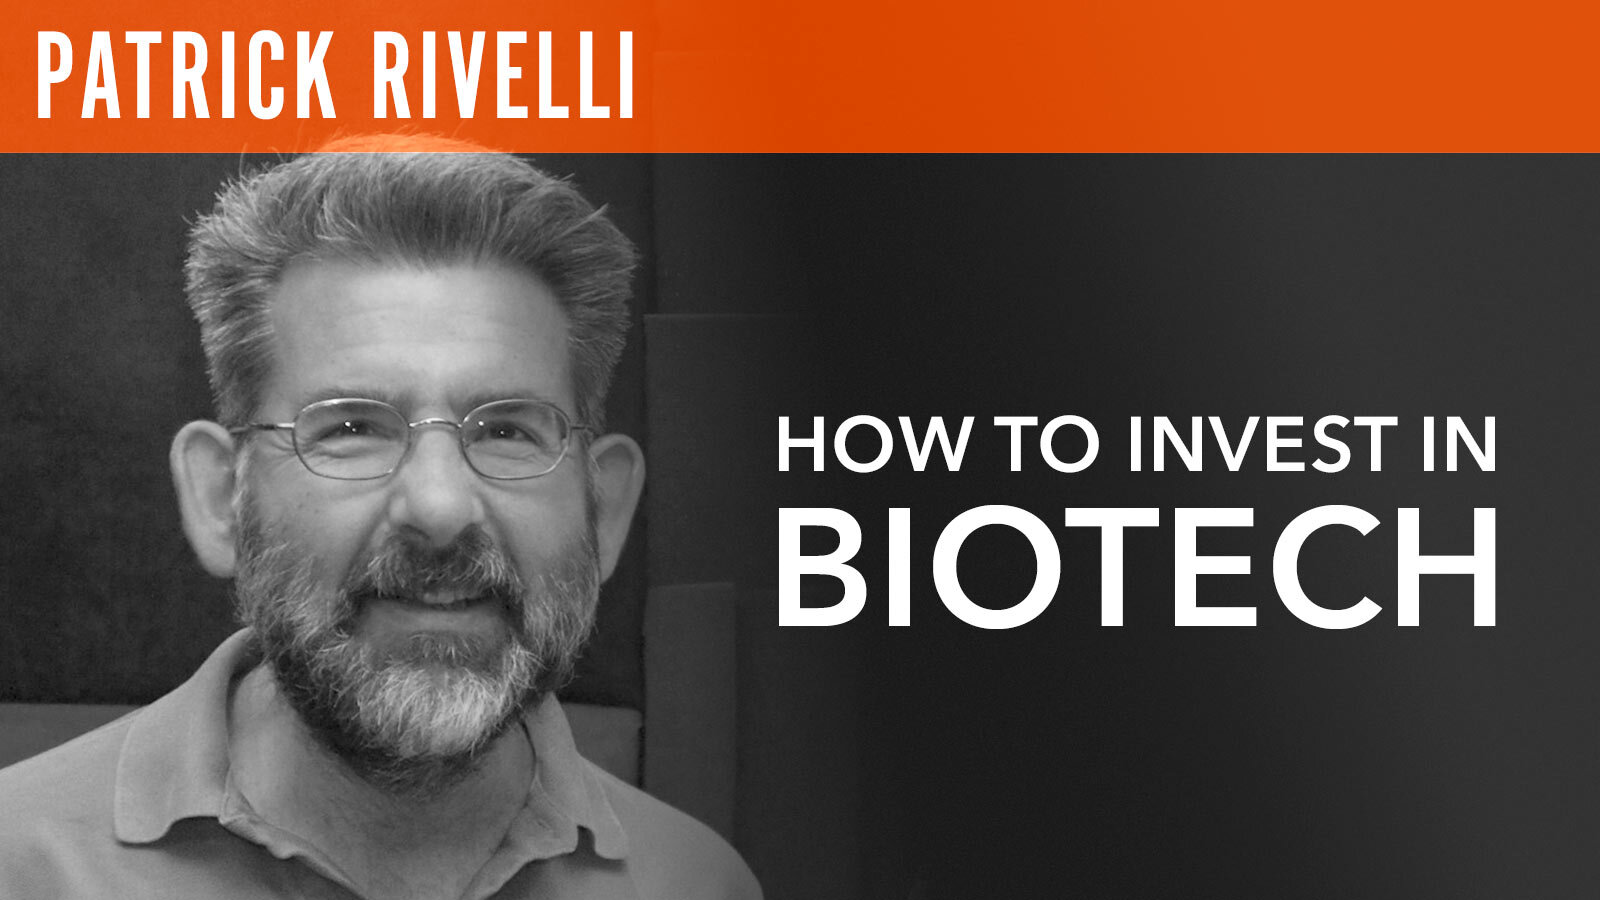 Patrick Rivelli, "How to Invest in Biotech"